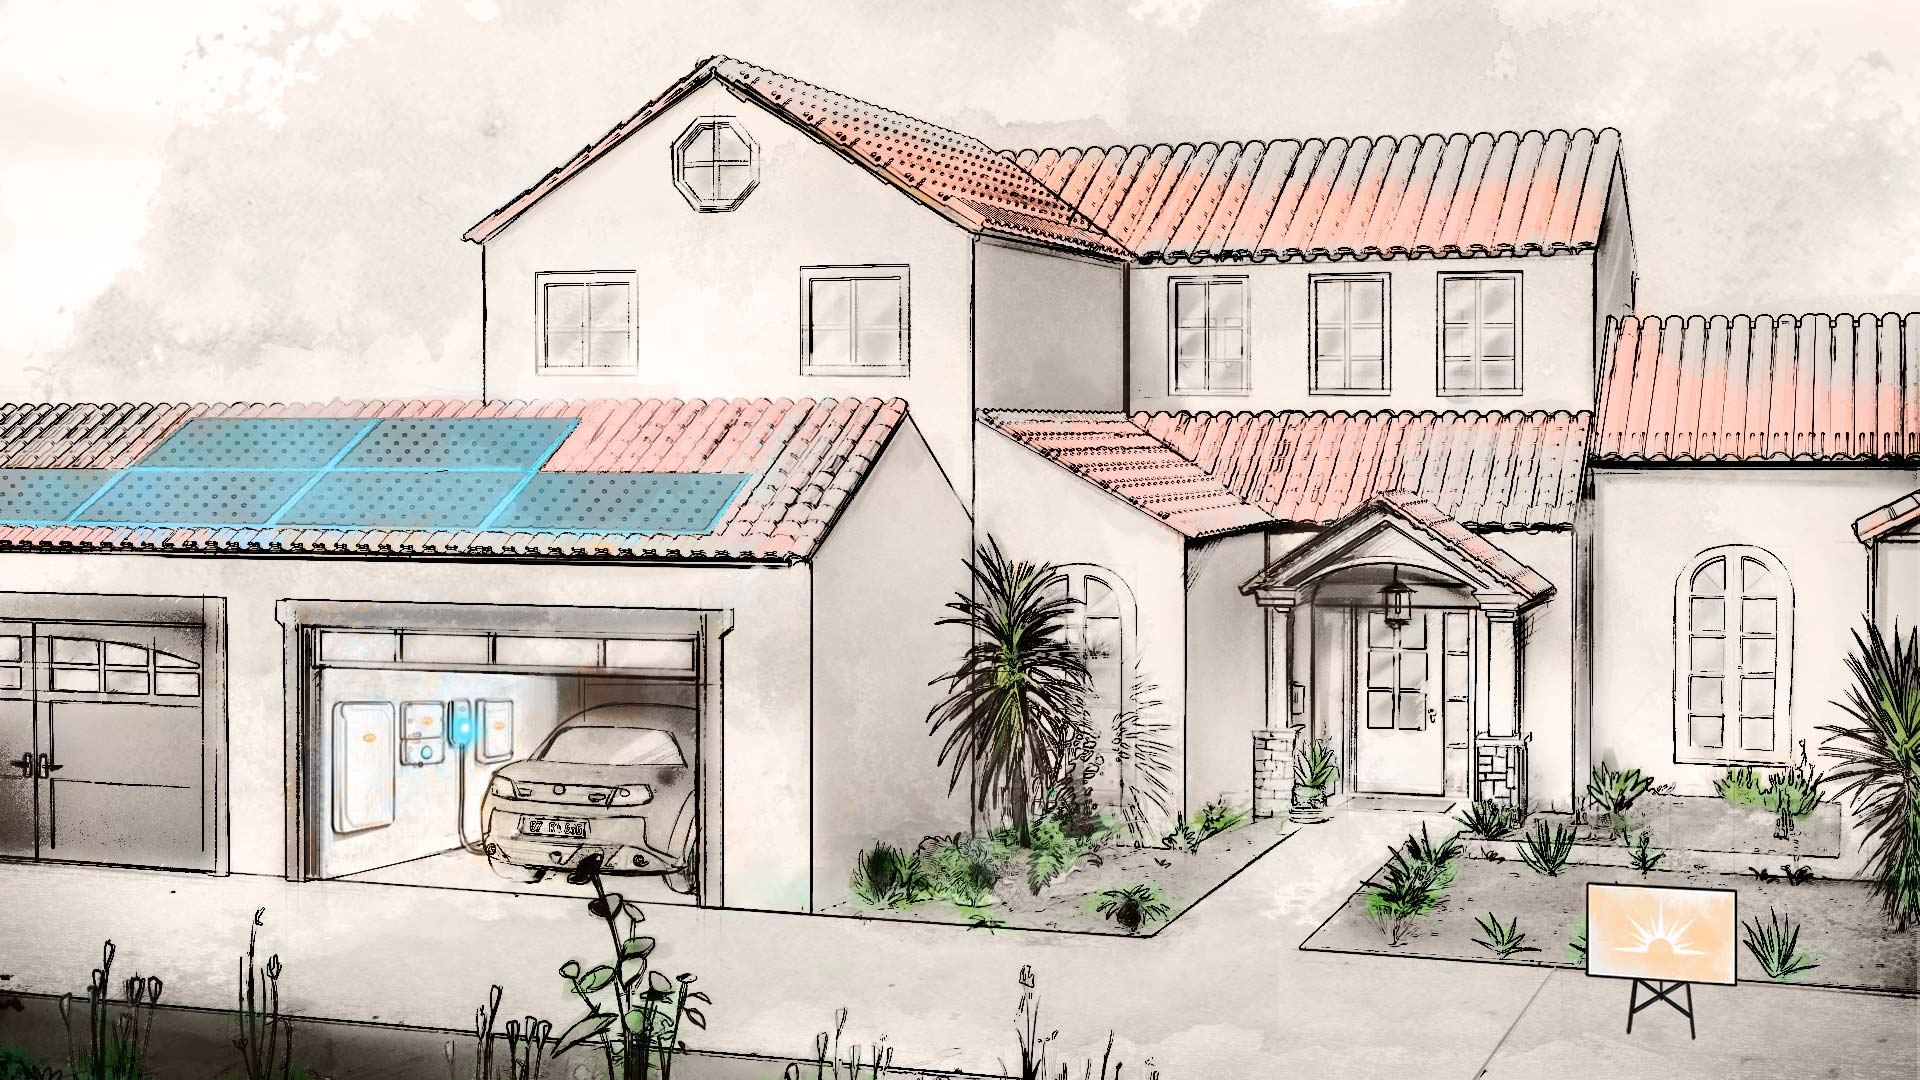 Illustration of a home in California that uses solar panels with battery backups